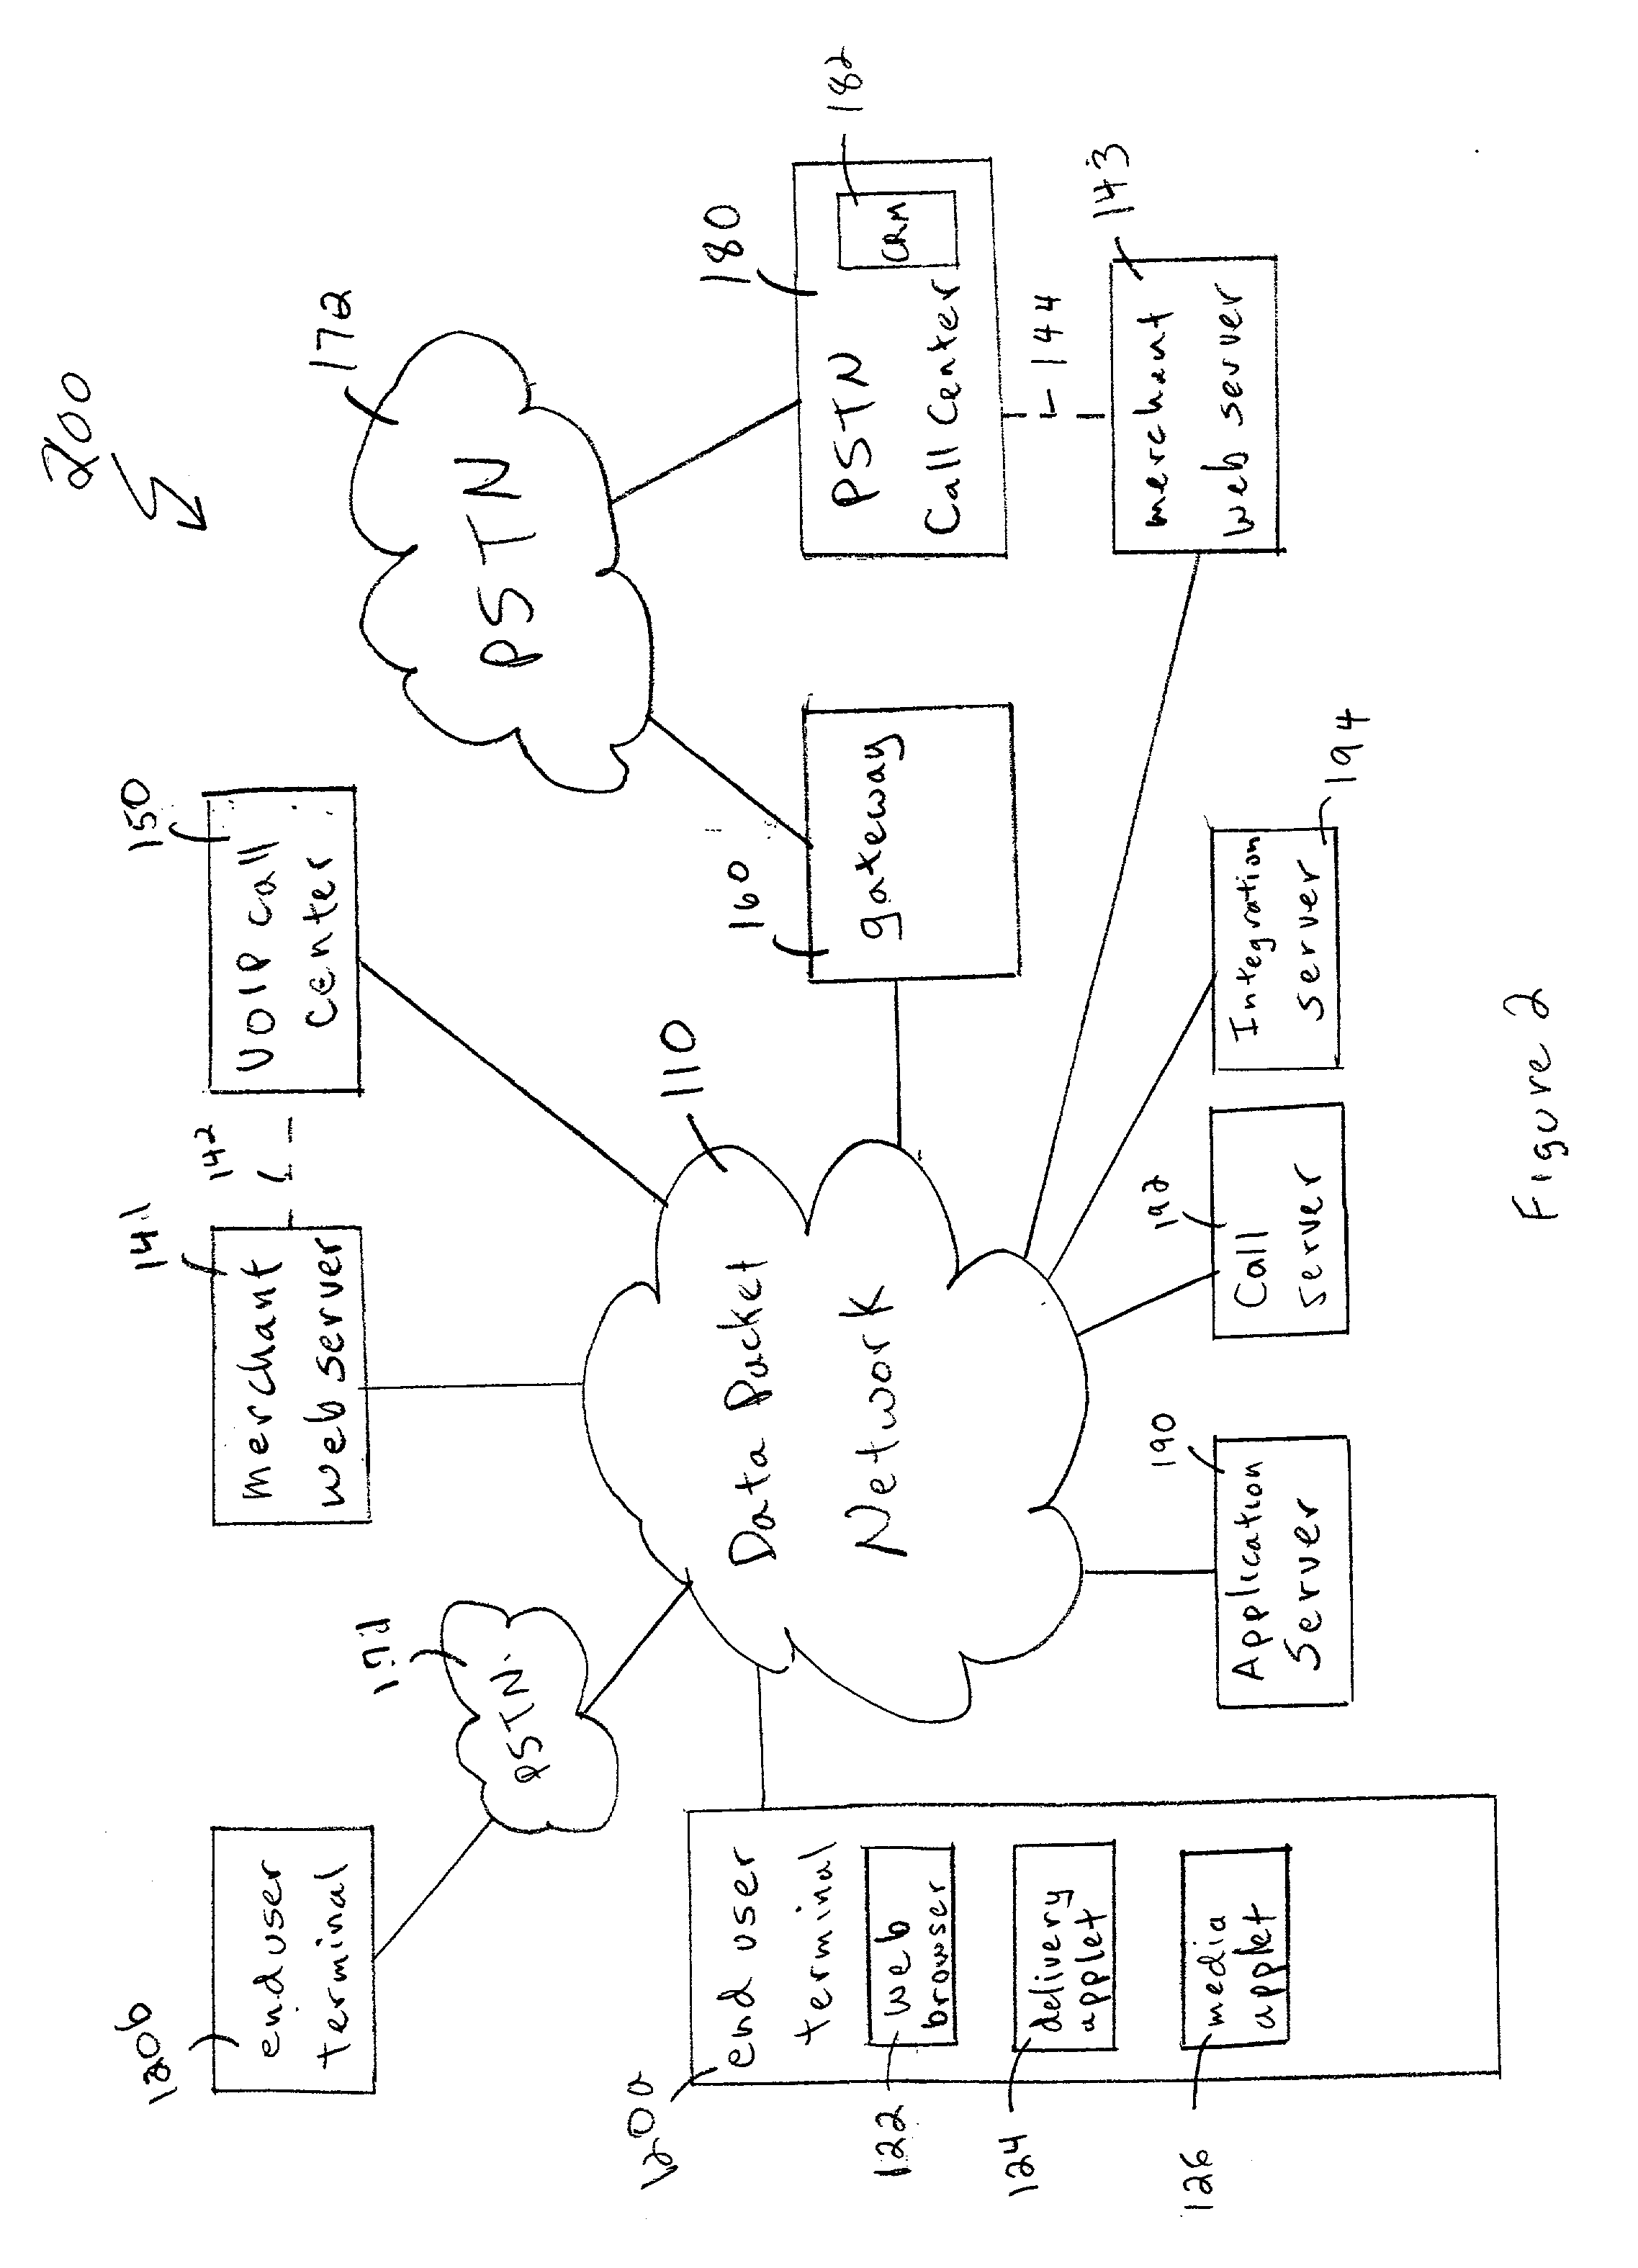 Caller identification and voice/data synchronization for internet telephony and related applications